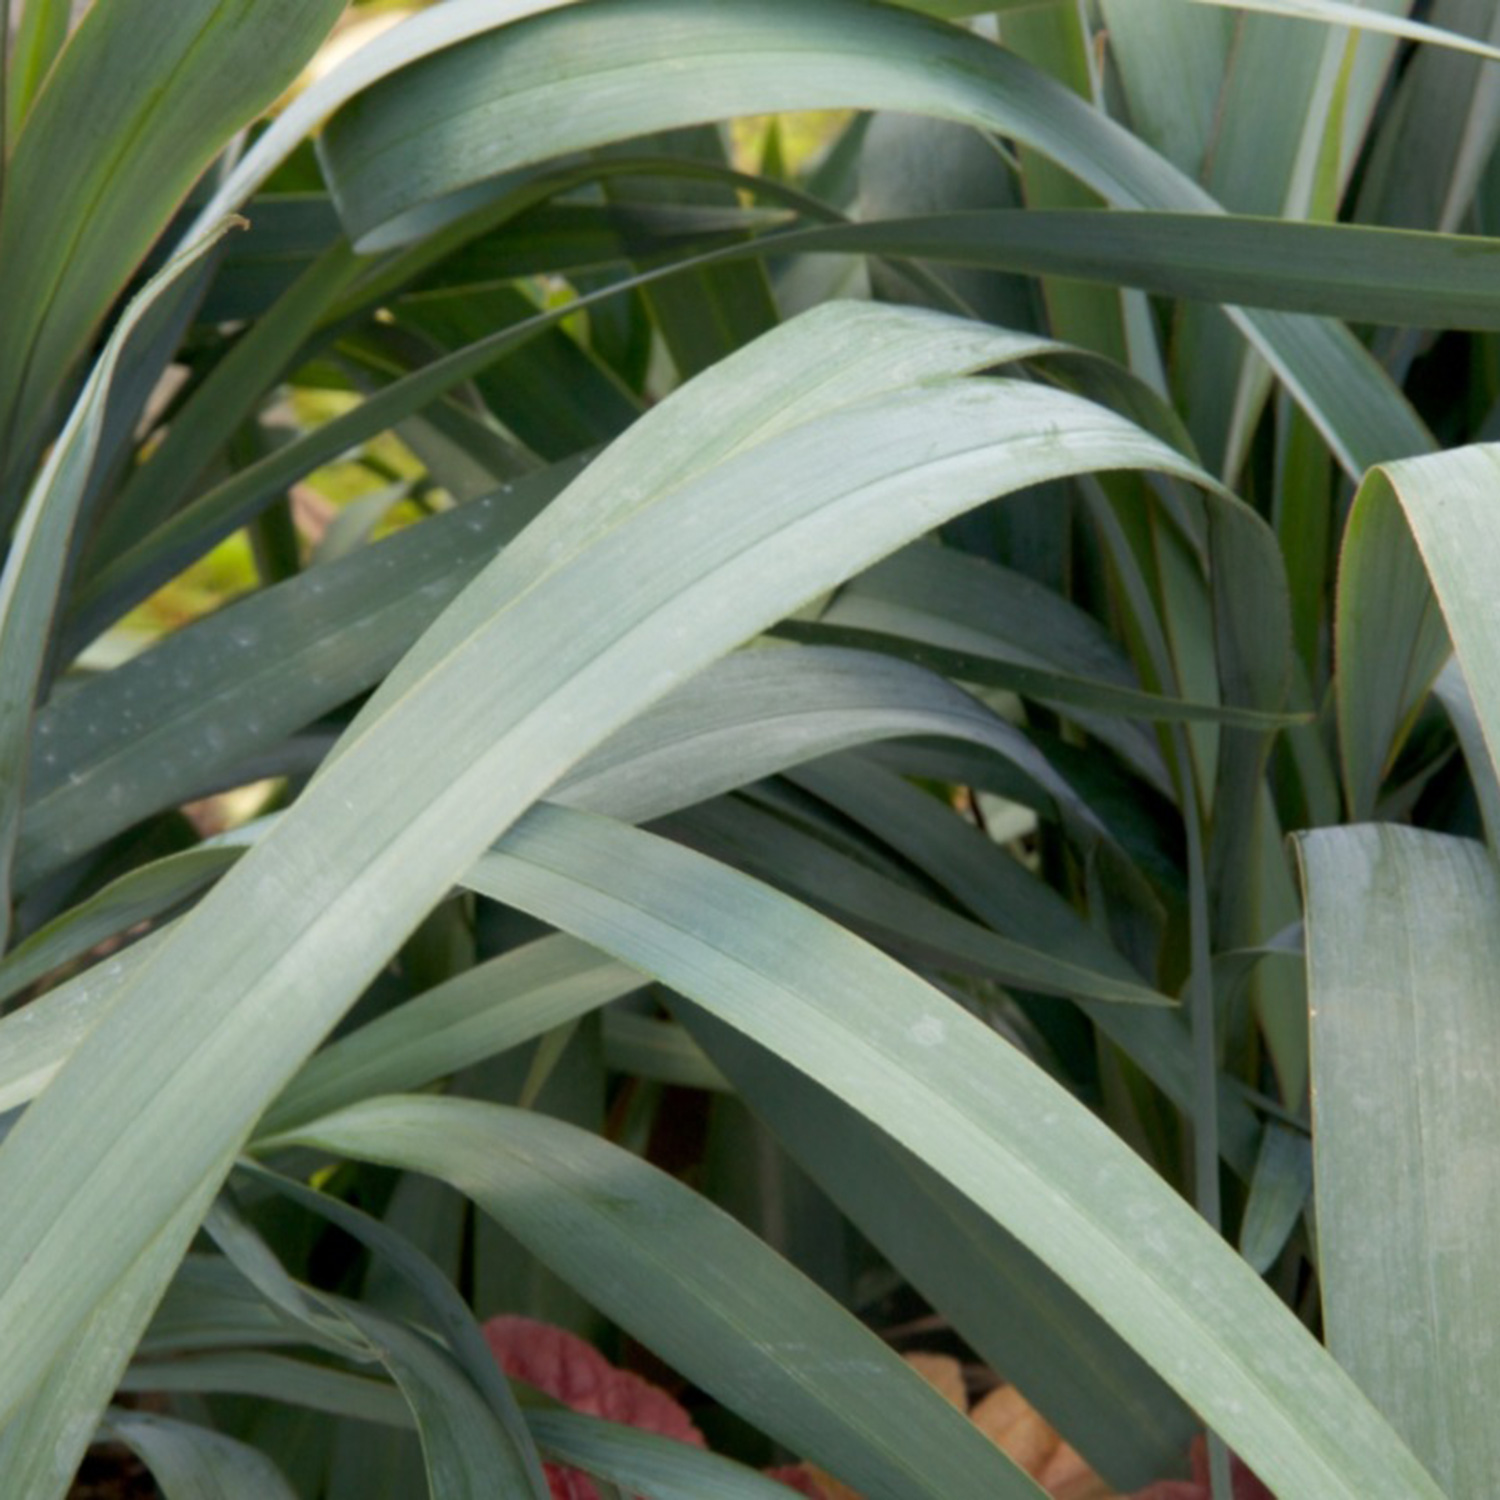 Clarity Blue Dianella 'Flax Lily' (2.5 Quart) Evergreen Ornamental Grass with Blue Foliage - image 3 of 6